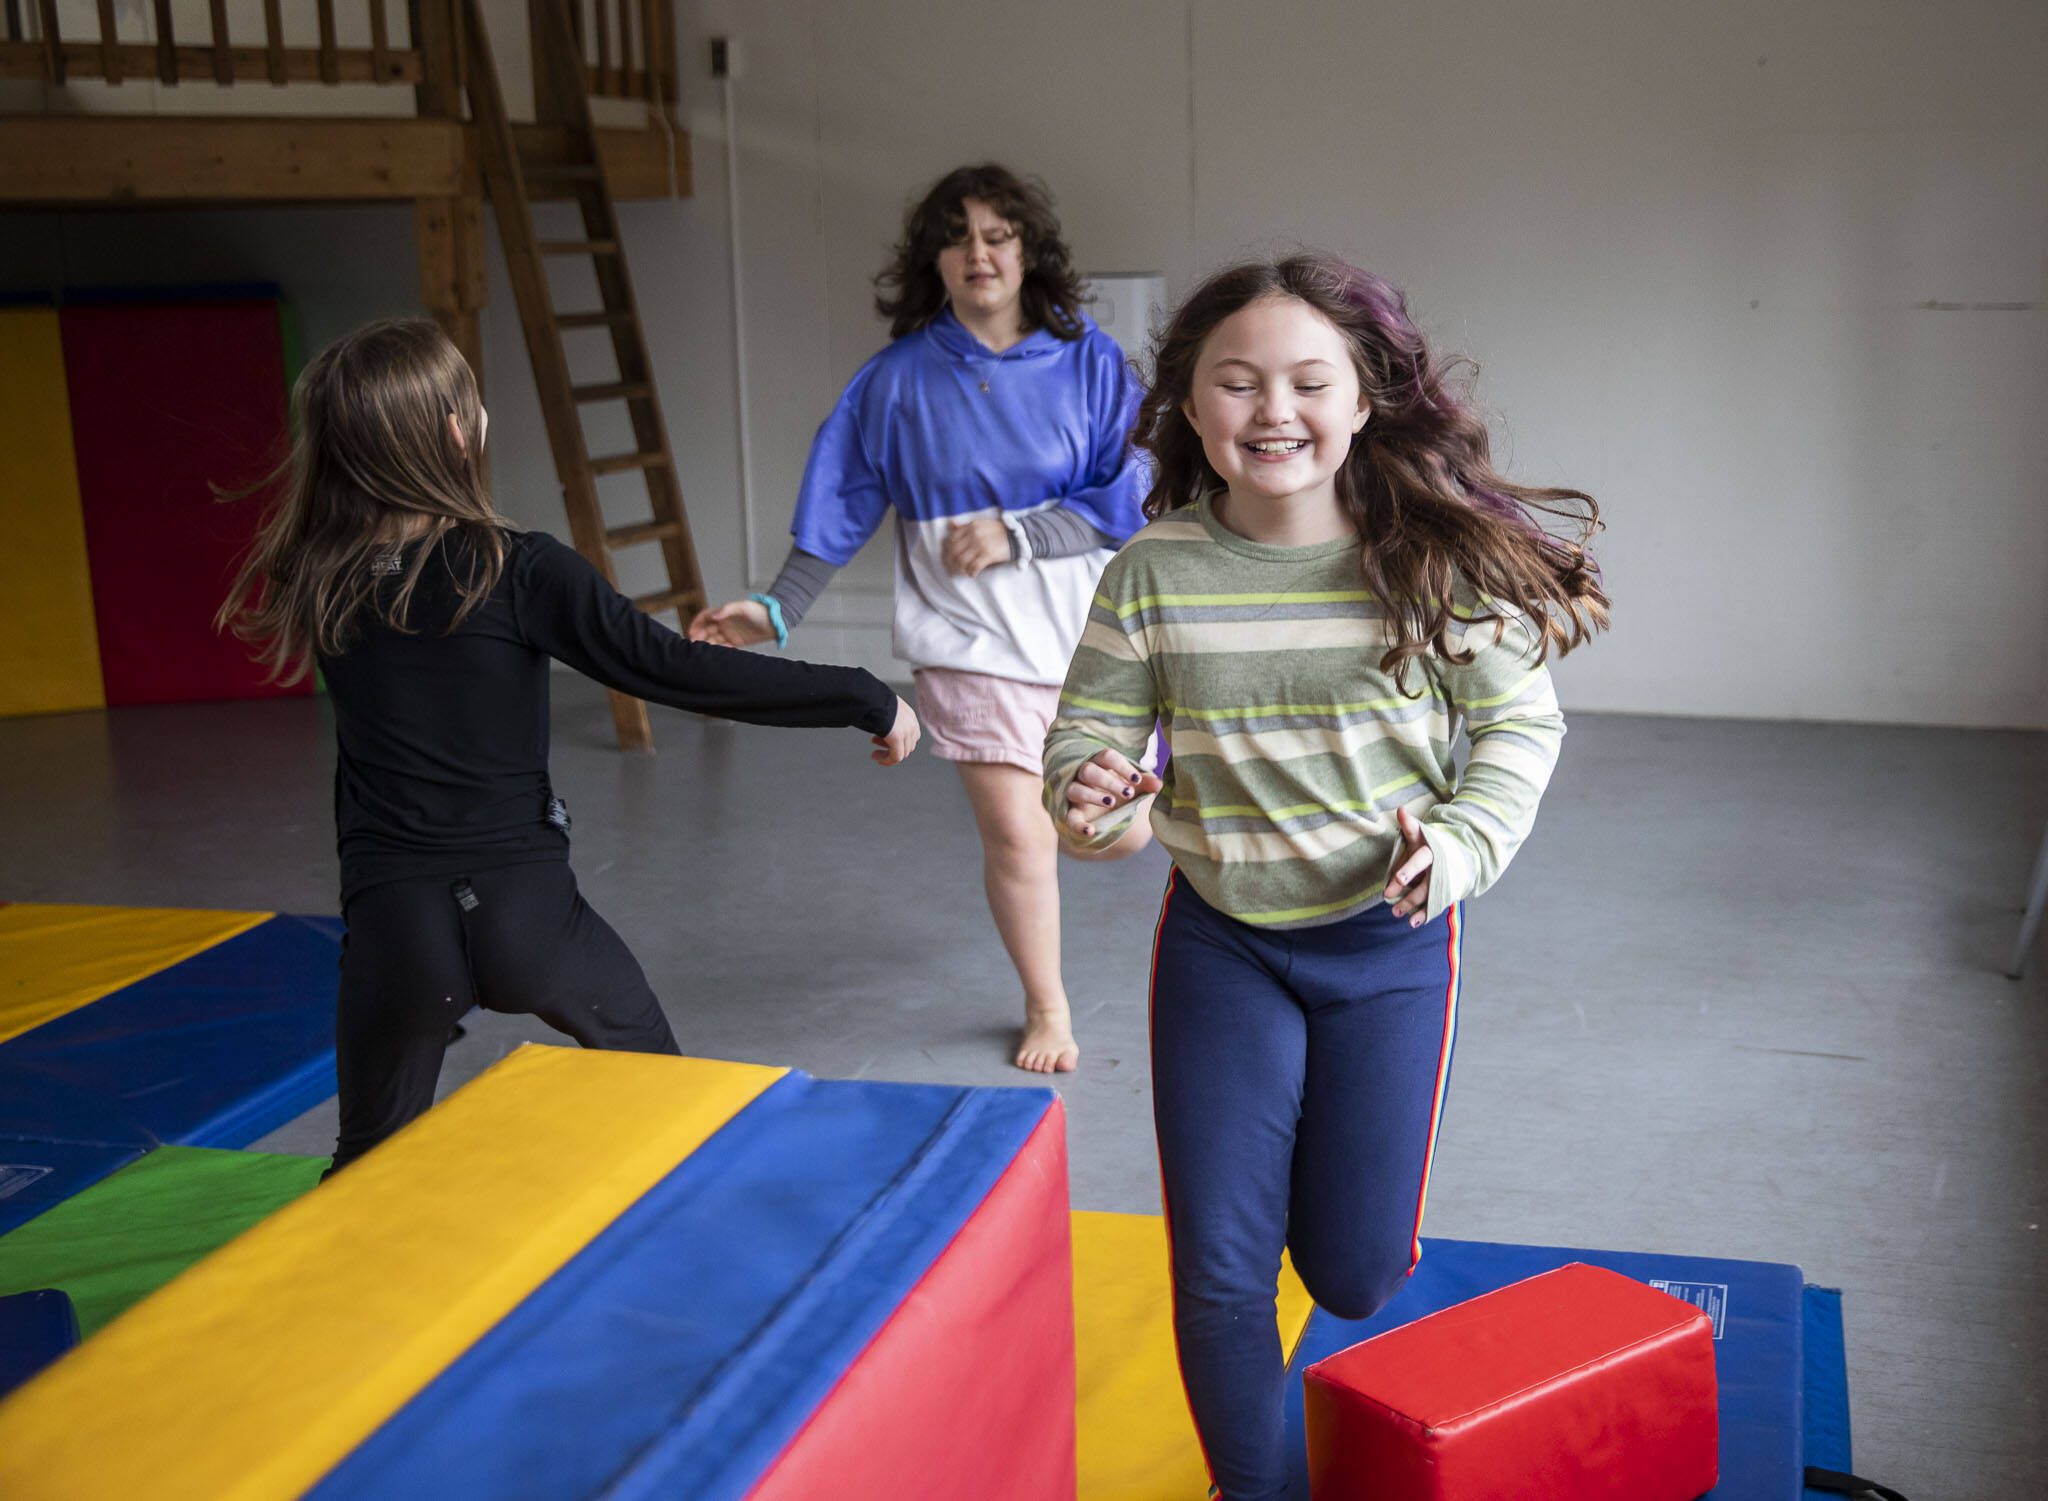 Madi Humpries, 9, right, Rose Austin, 13, center, and Eirene Ritting, 8, runs around a large open activity room at Clearwater School on Thursday, Jan. 25, 2024 in Bothell, Washington. (Olivia Vanni / The Herald)